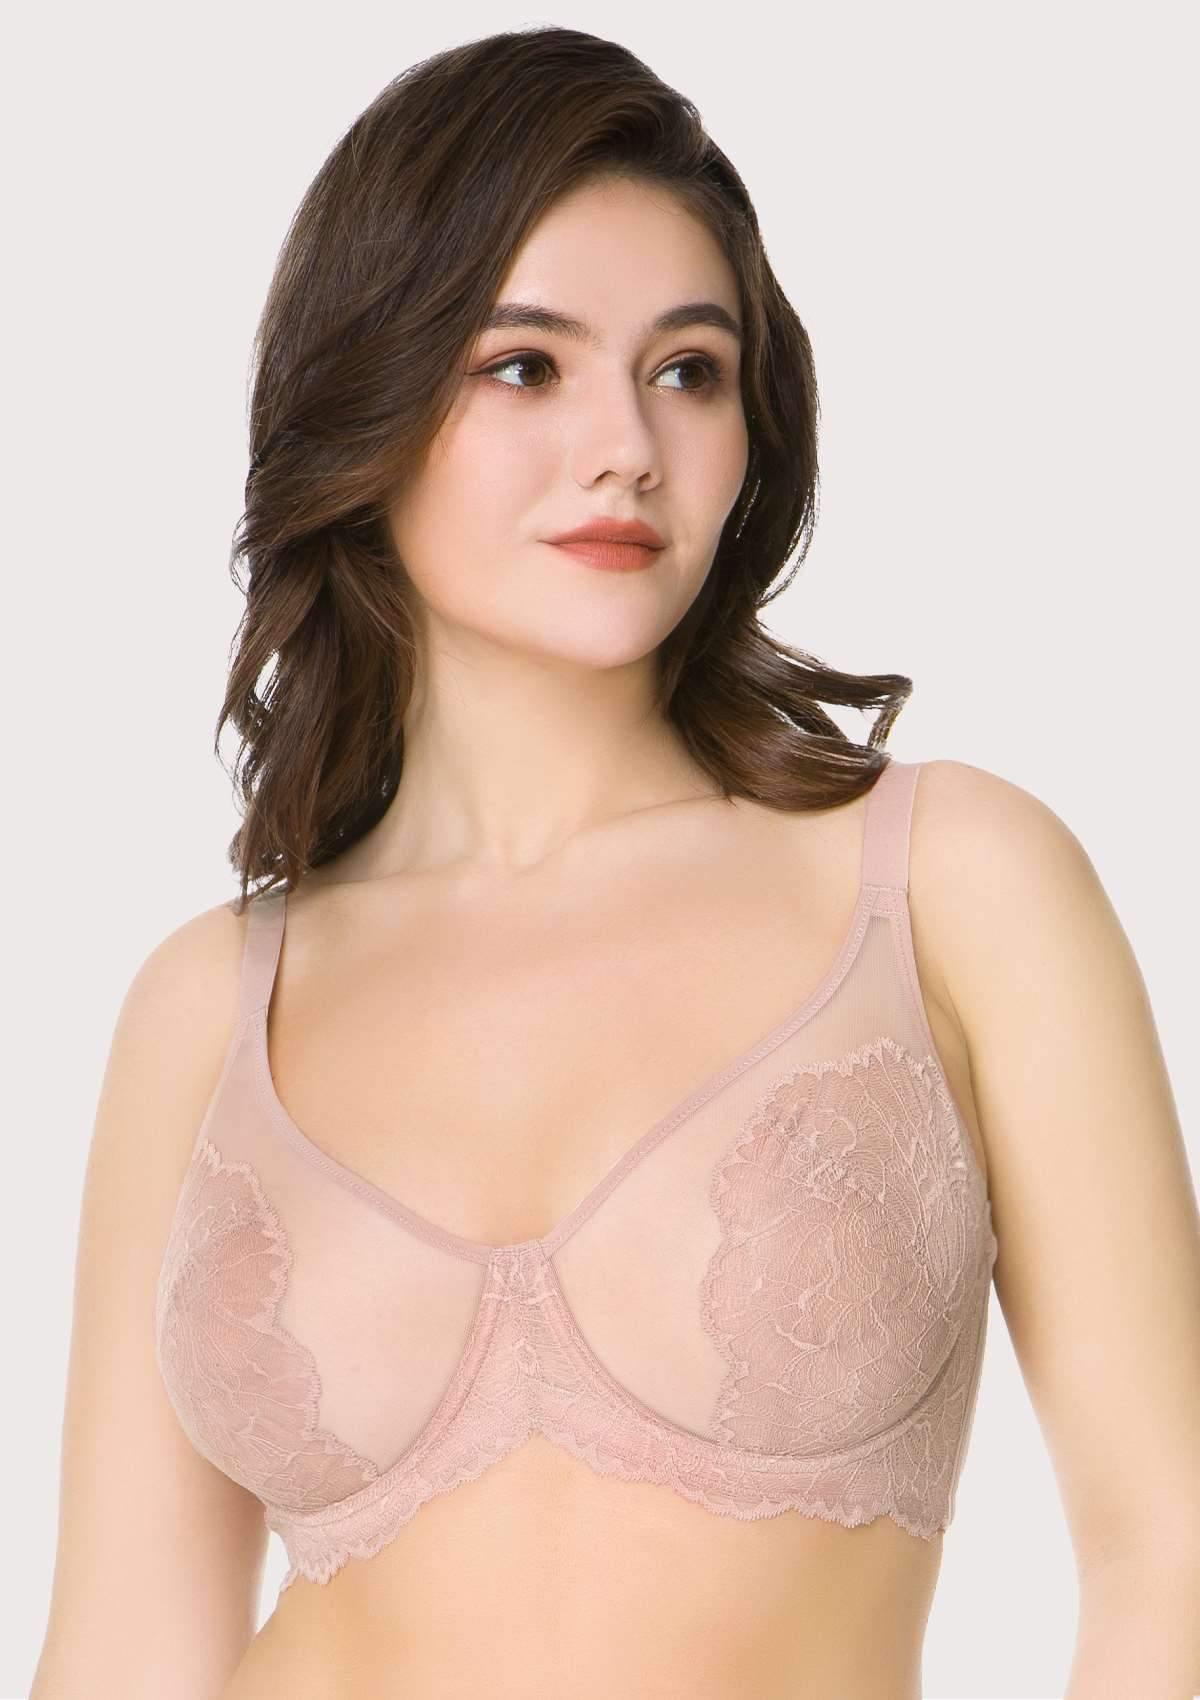 HSIA Blossom Lace Bra And Panties Set: Best Bra For Large Busts - Dark Pink / 46 / D